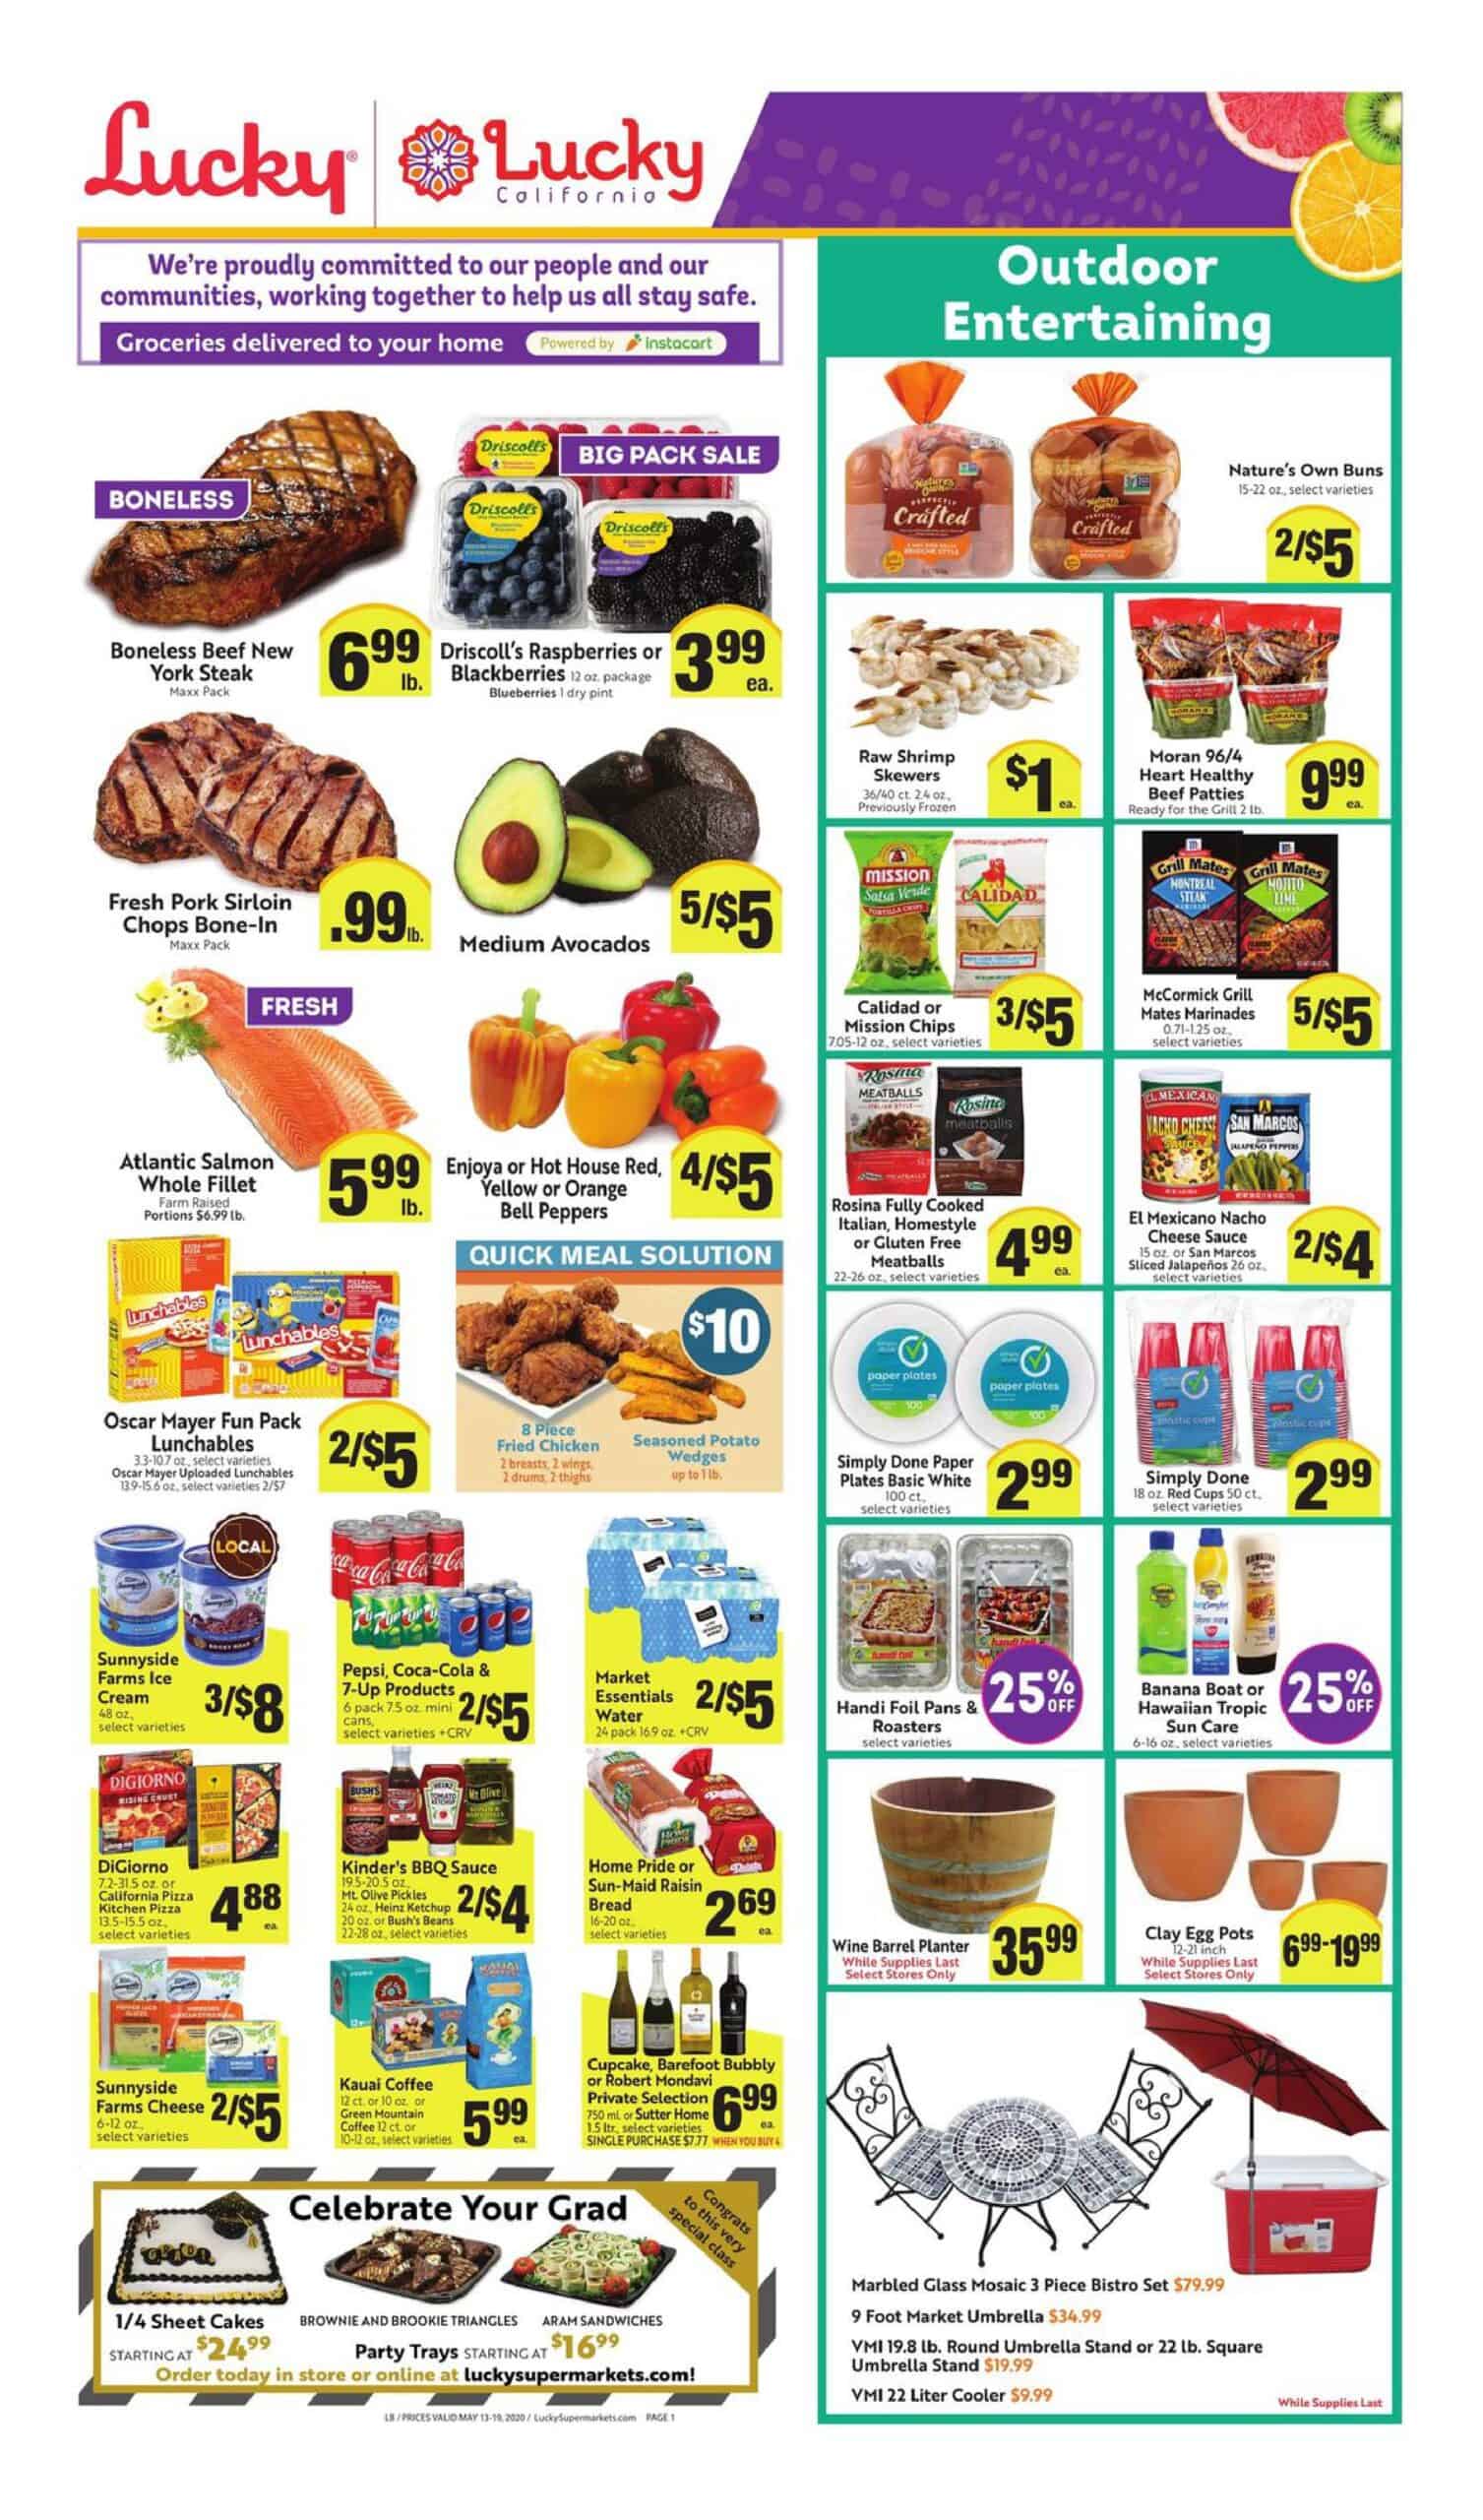 Luckys Weekly Ad Scan May 13th - May 19th, 2020